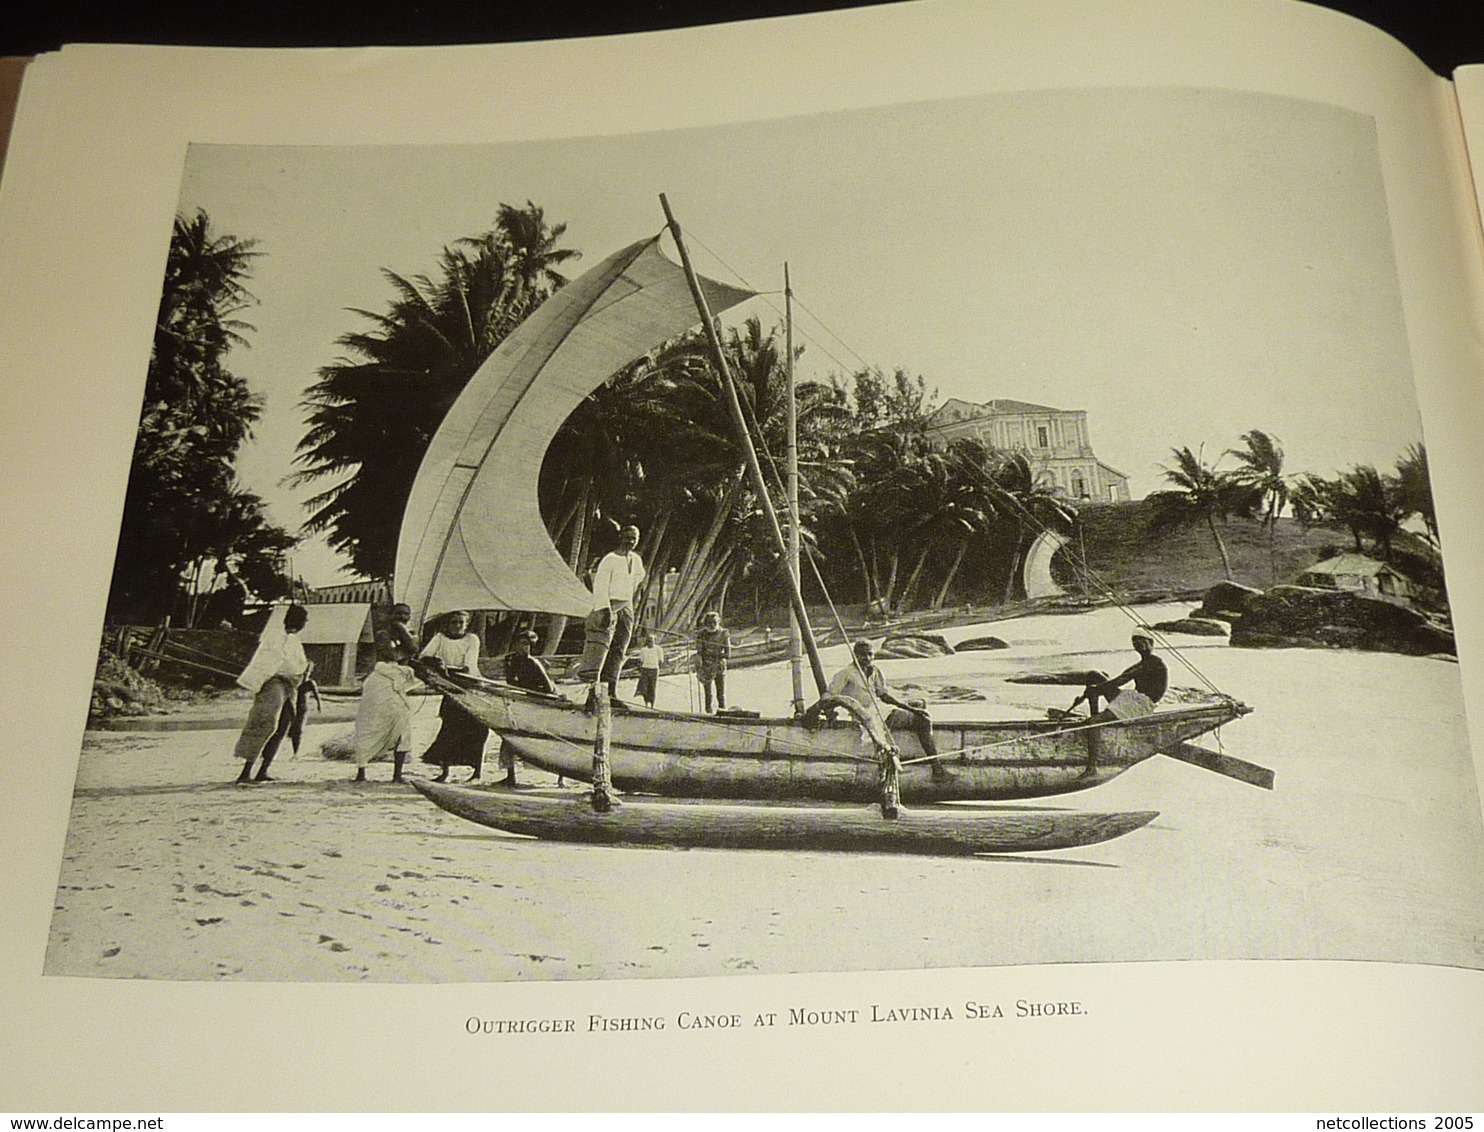 THE HUNDRED BEST VIEWS OF CEYLON - FROM PHOTOGRAPHS TAKEN BY THE PUBLISHERS - 100 MEILLEURS VUES DE CEYLON (AD) - Luoghi